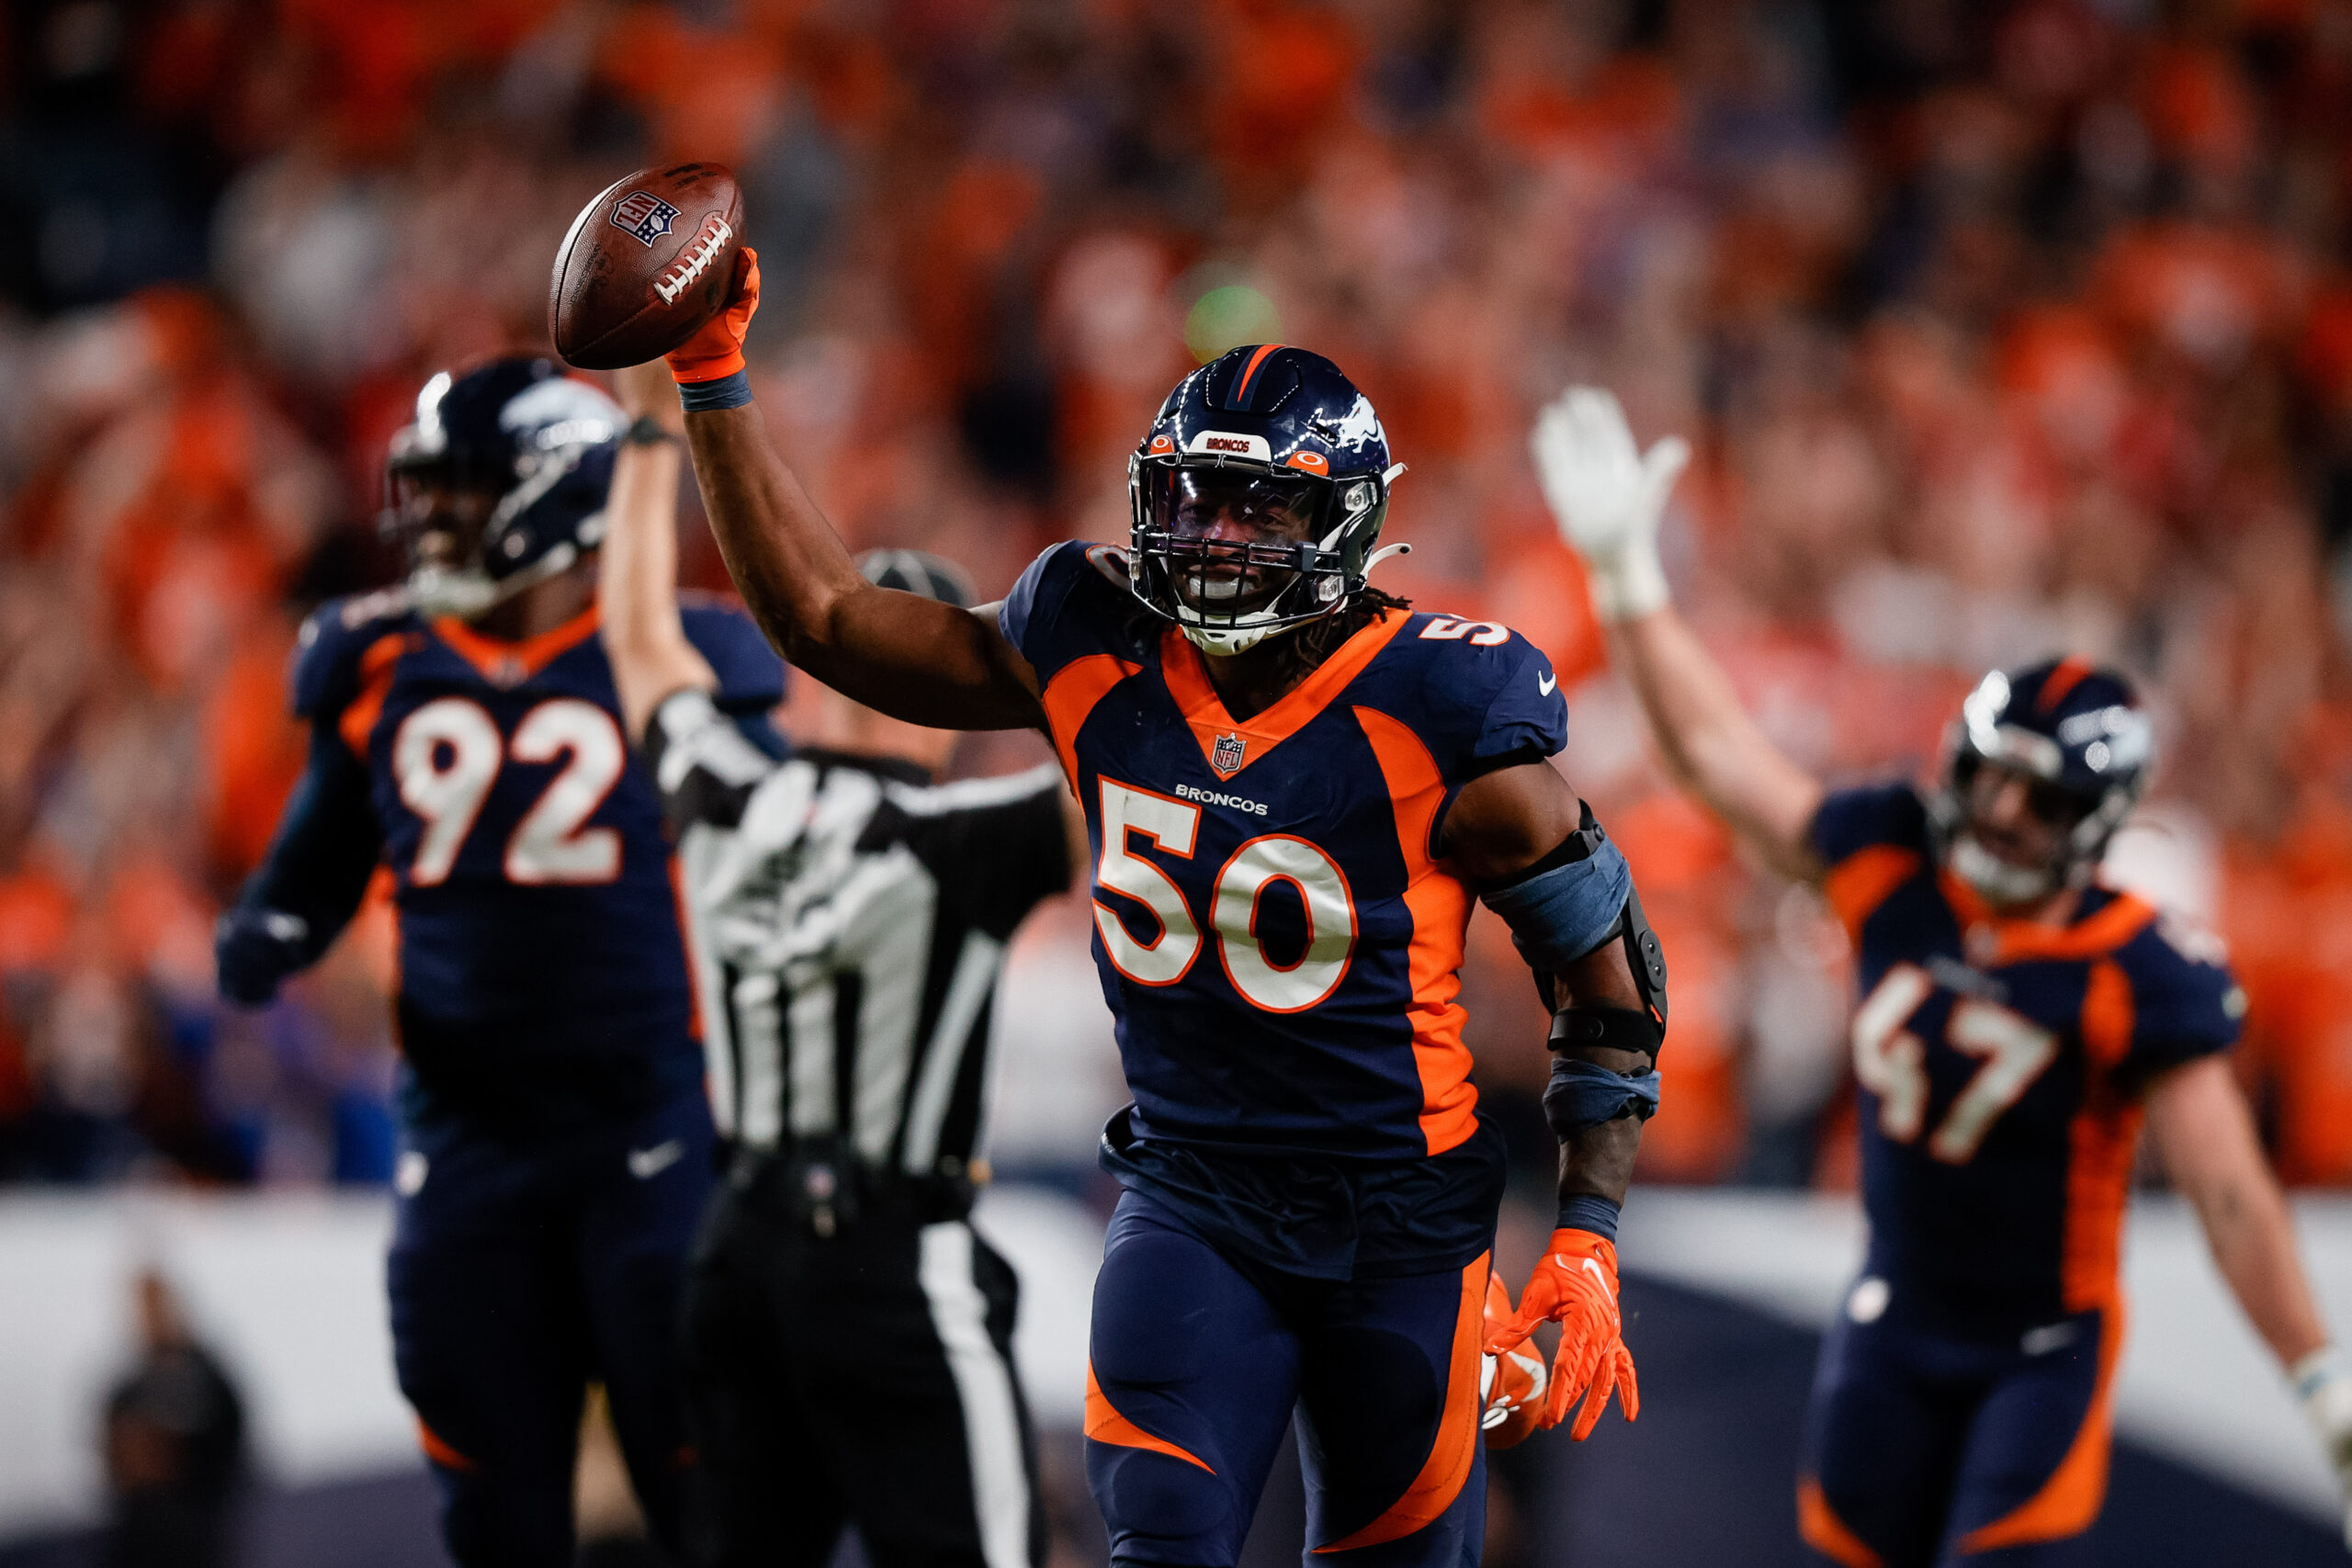 Baron Browning to step up in place of injured Broncos OLB Randy Gregory